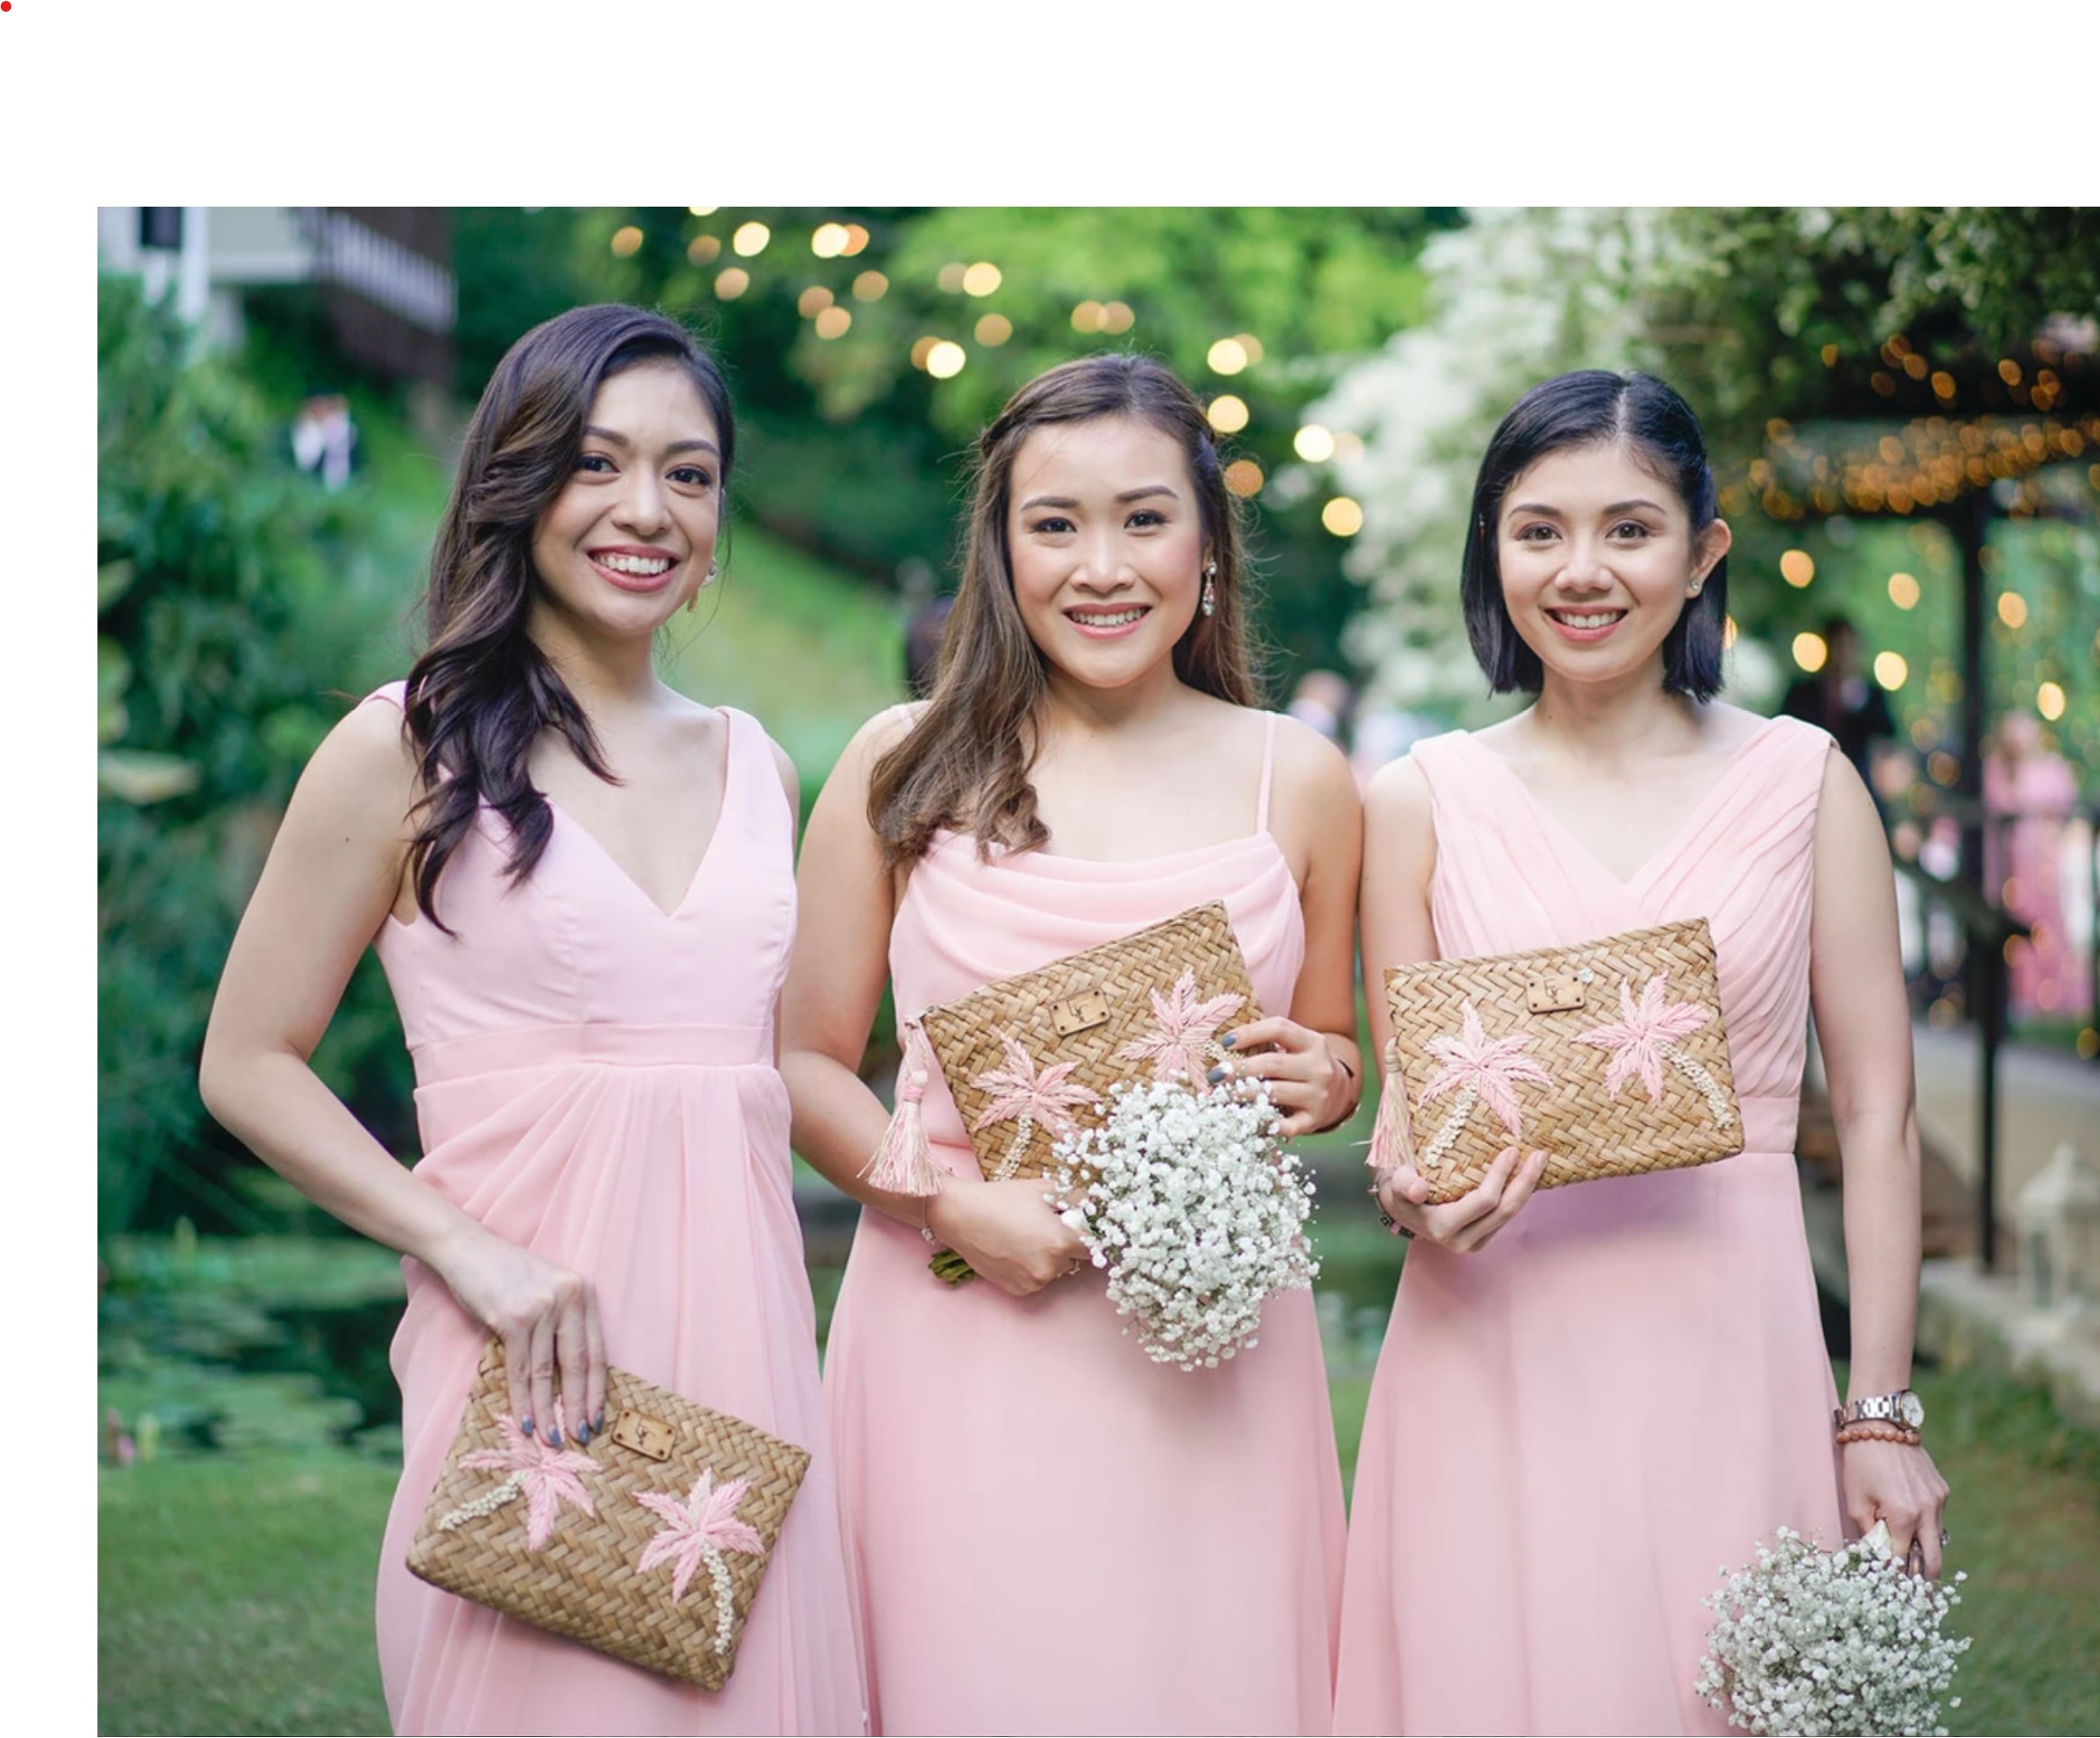 Create personalised clutches, handbags or baskets your wedding party can use on the wedding day itself and re-use as a lovely remembrance of your big day.